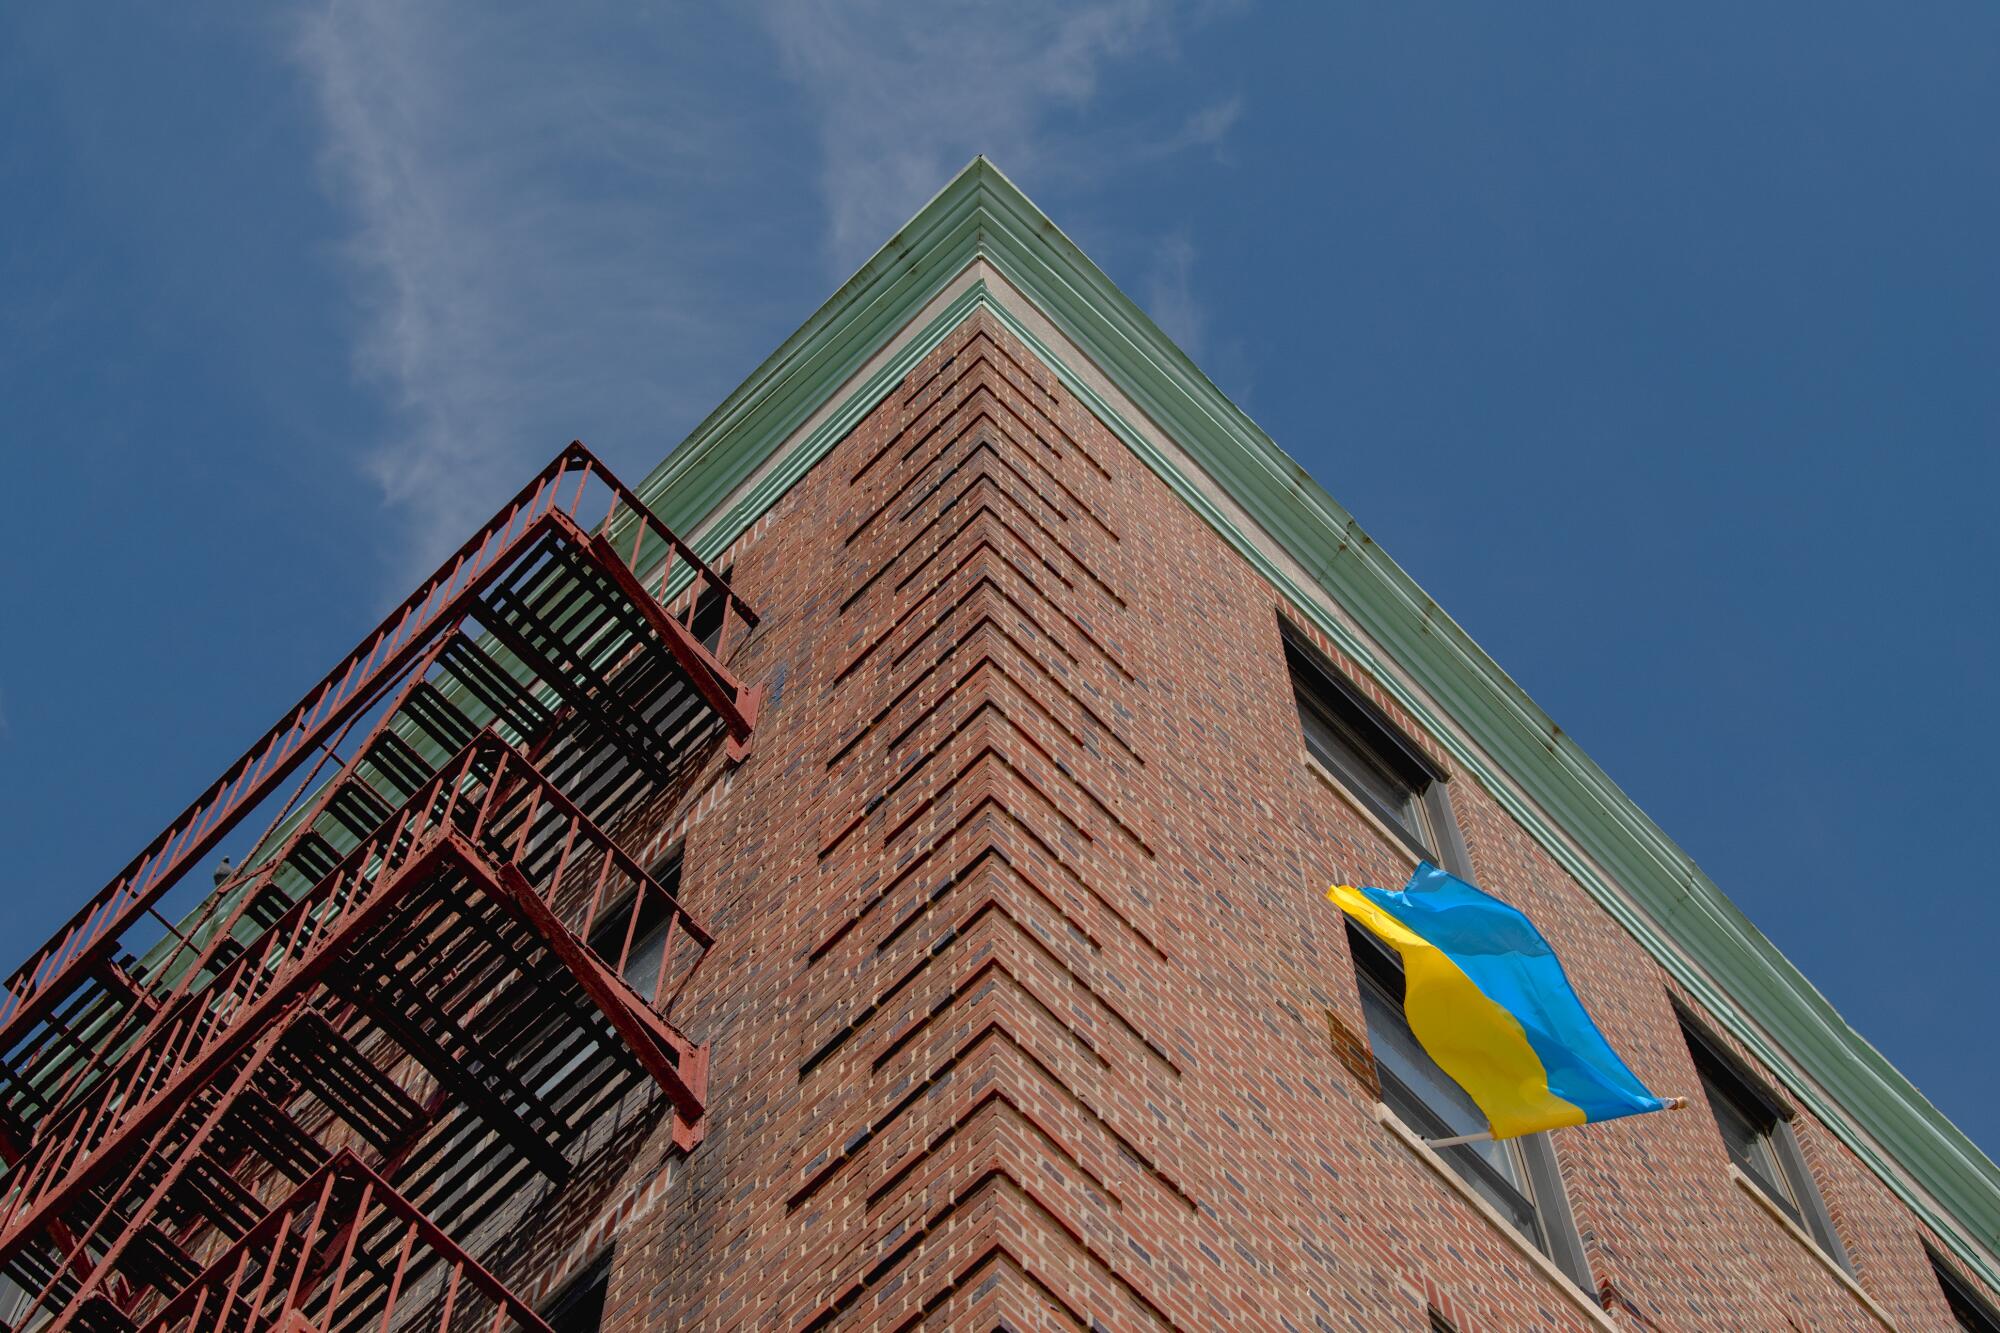 A blue-and-yellow Ukrainian flag hangs from a window.